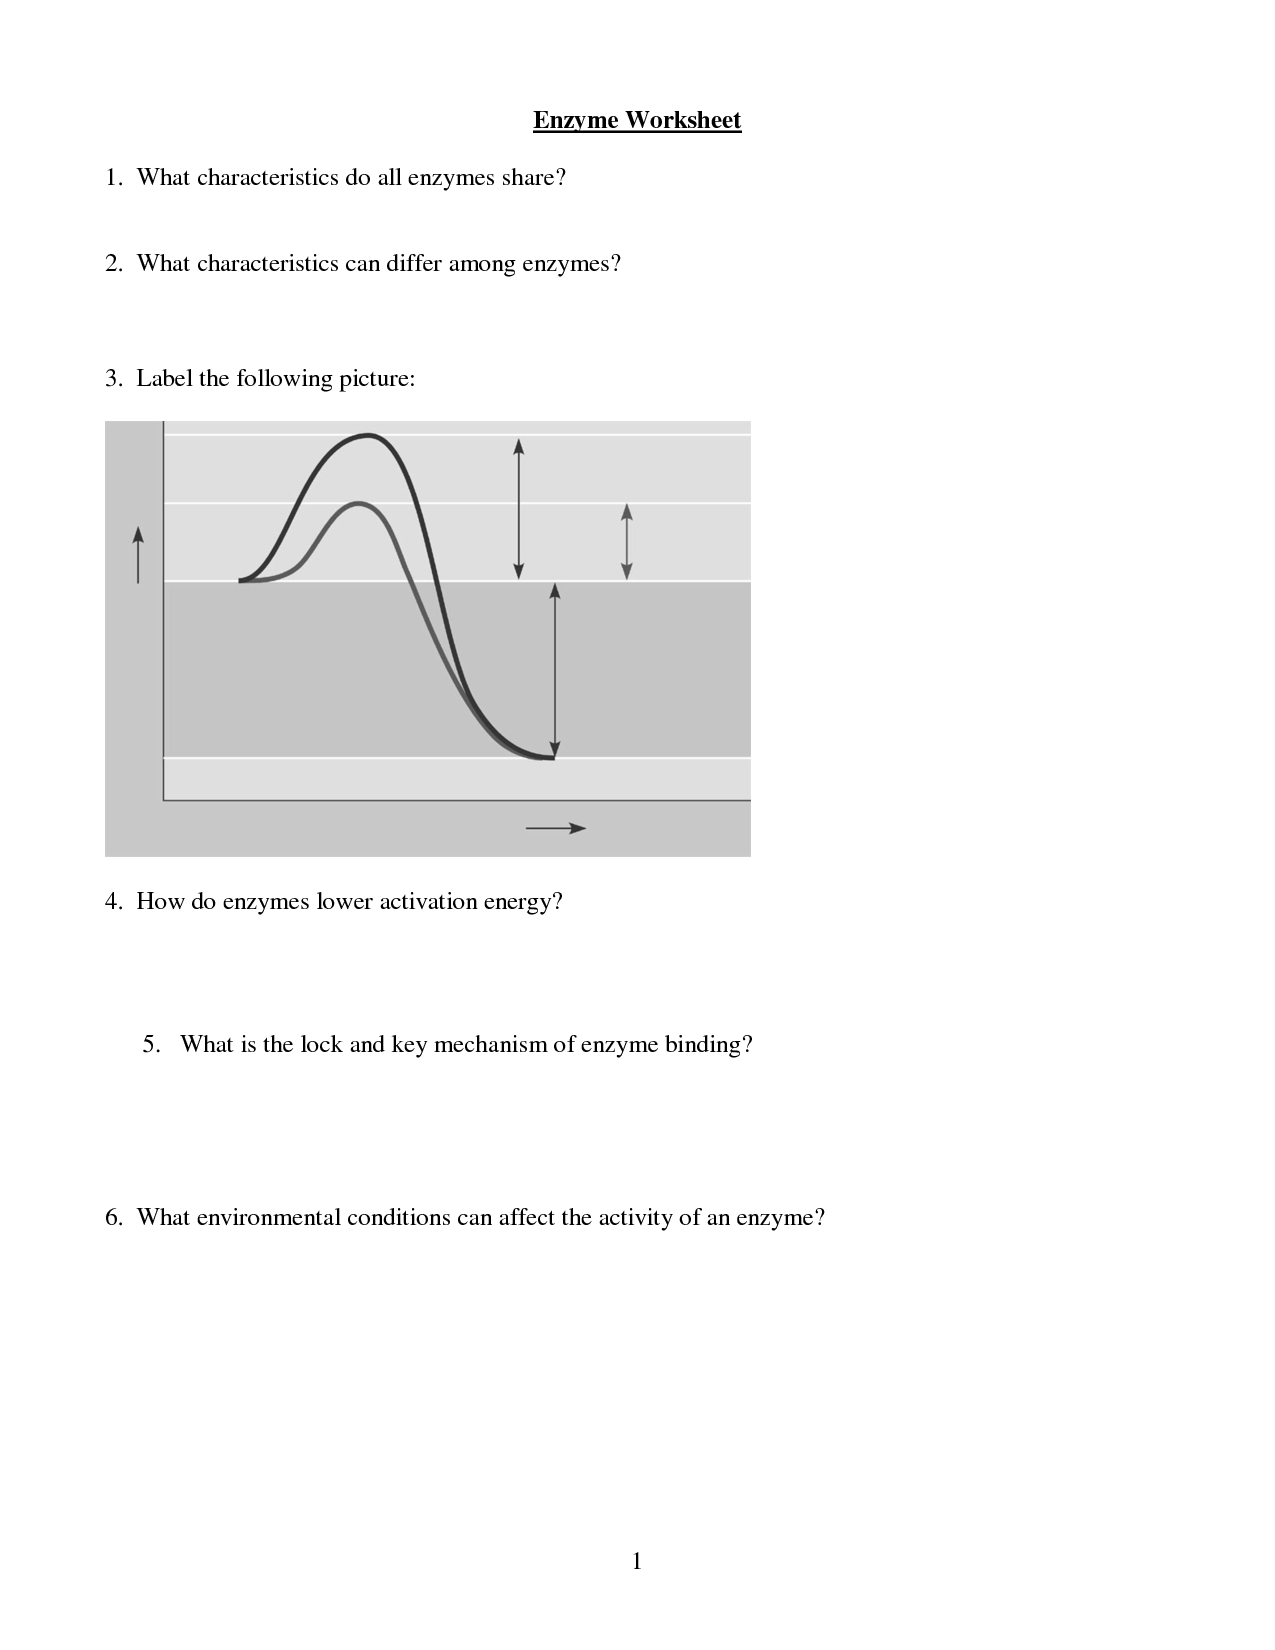 12-best-images-of-enzyme-graph-worksheet-enzymes-temperature-worksheet-linear-graphs